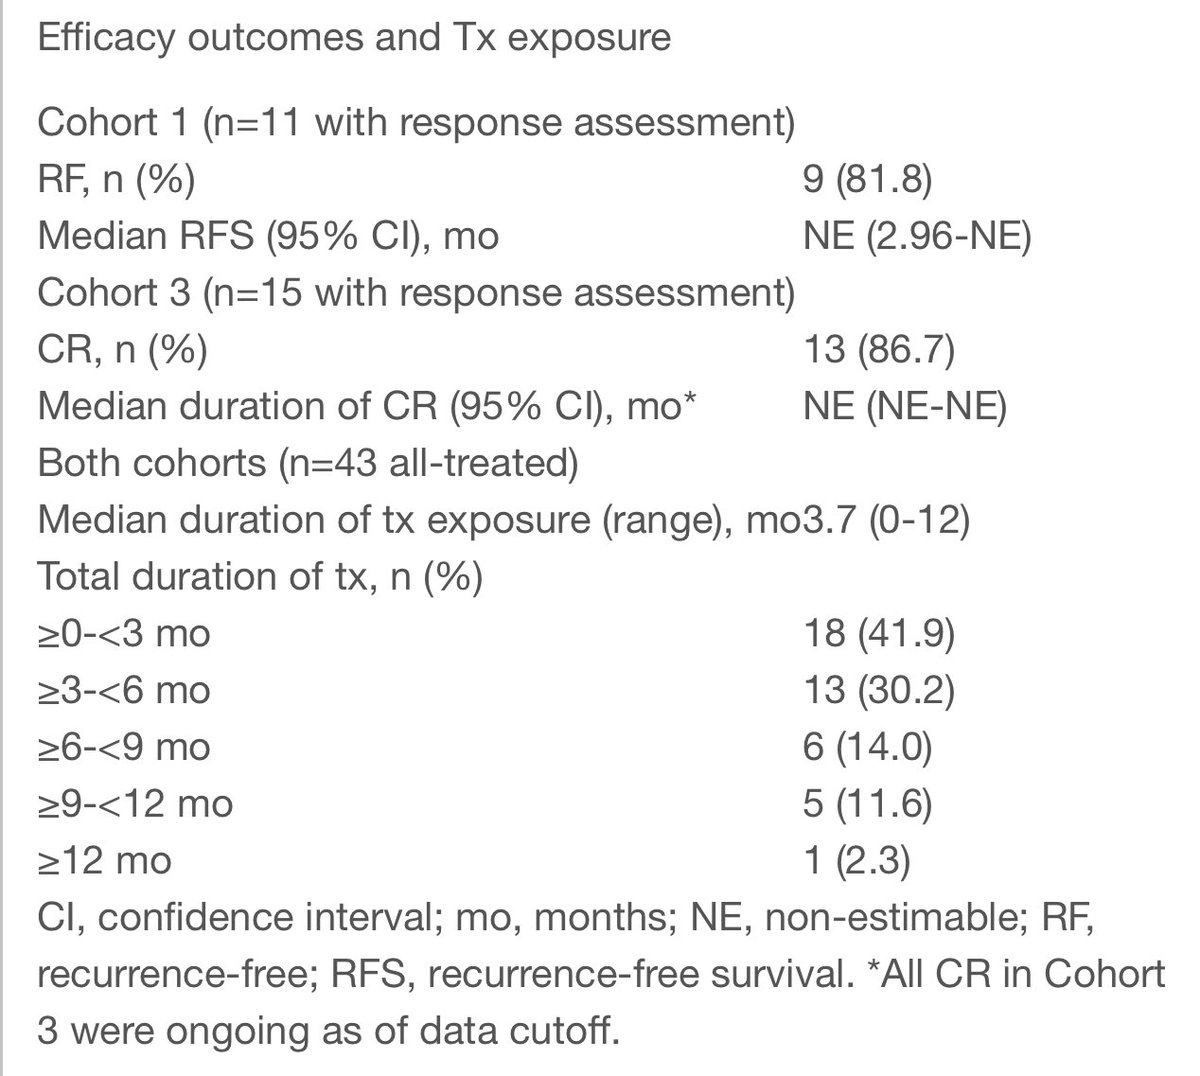 #ESMO23 Late breaker: FIH Study #TAR210 intravesical #Erdafitinib delivery system for #FGFR+ #UrothelialCarcinoma:
👉High recurrence free/complete response rate
👉11/13 evaluable patients (BCG exp. HR #NMIBC) + 13/15 (IR #NMIBC) recurrence free #AntoniVilaseca @JanssenGlobal